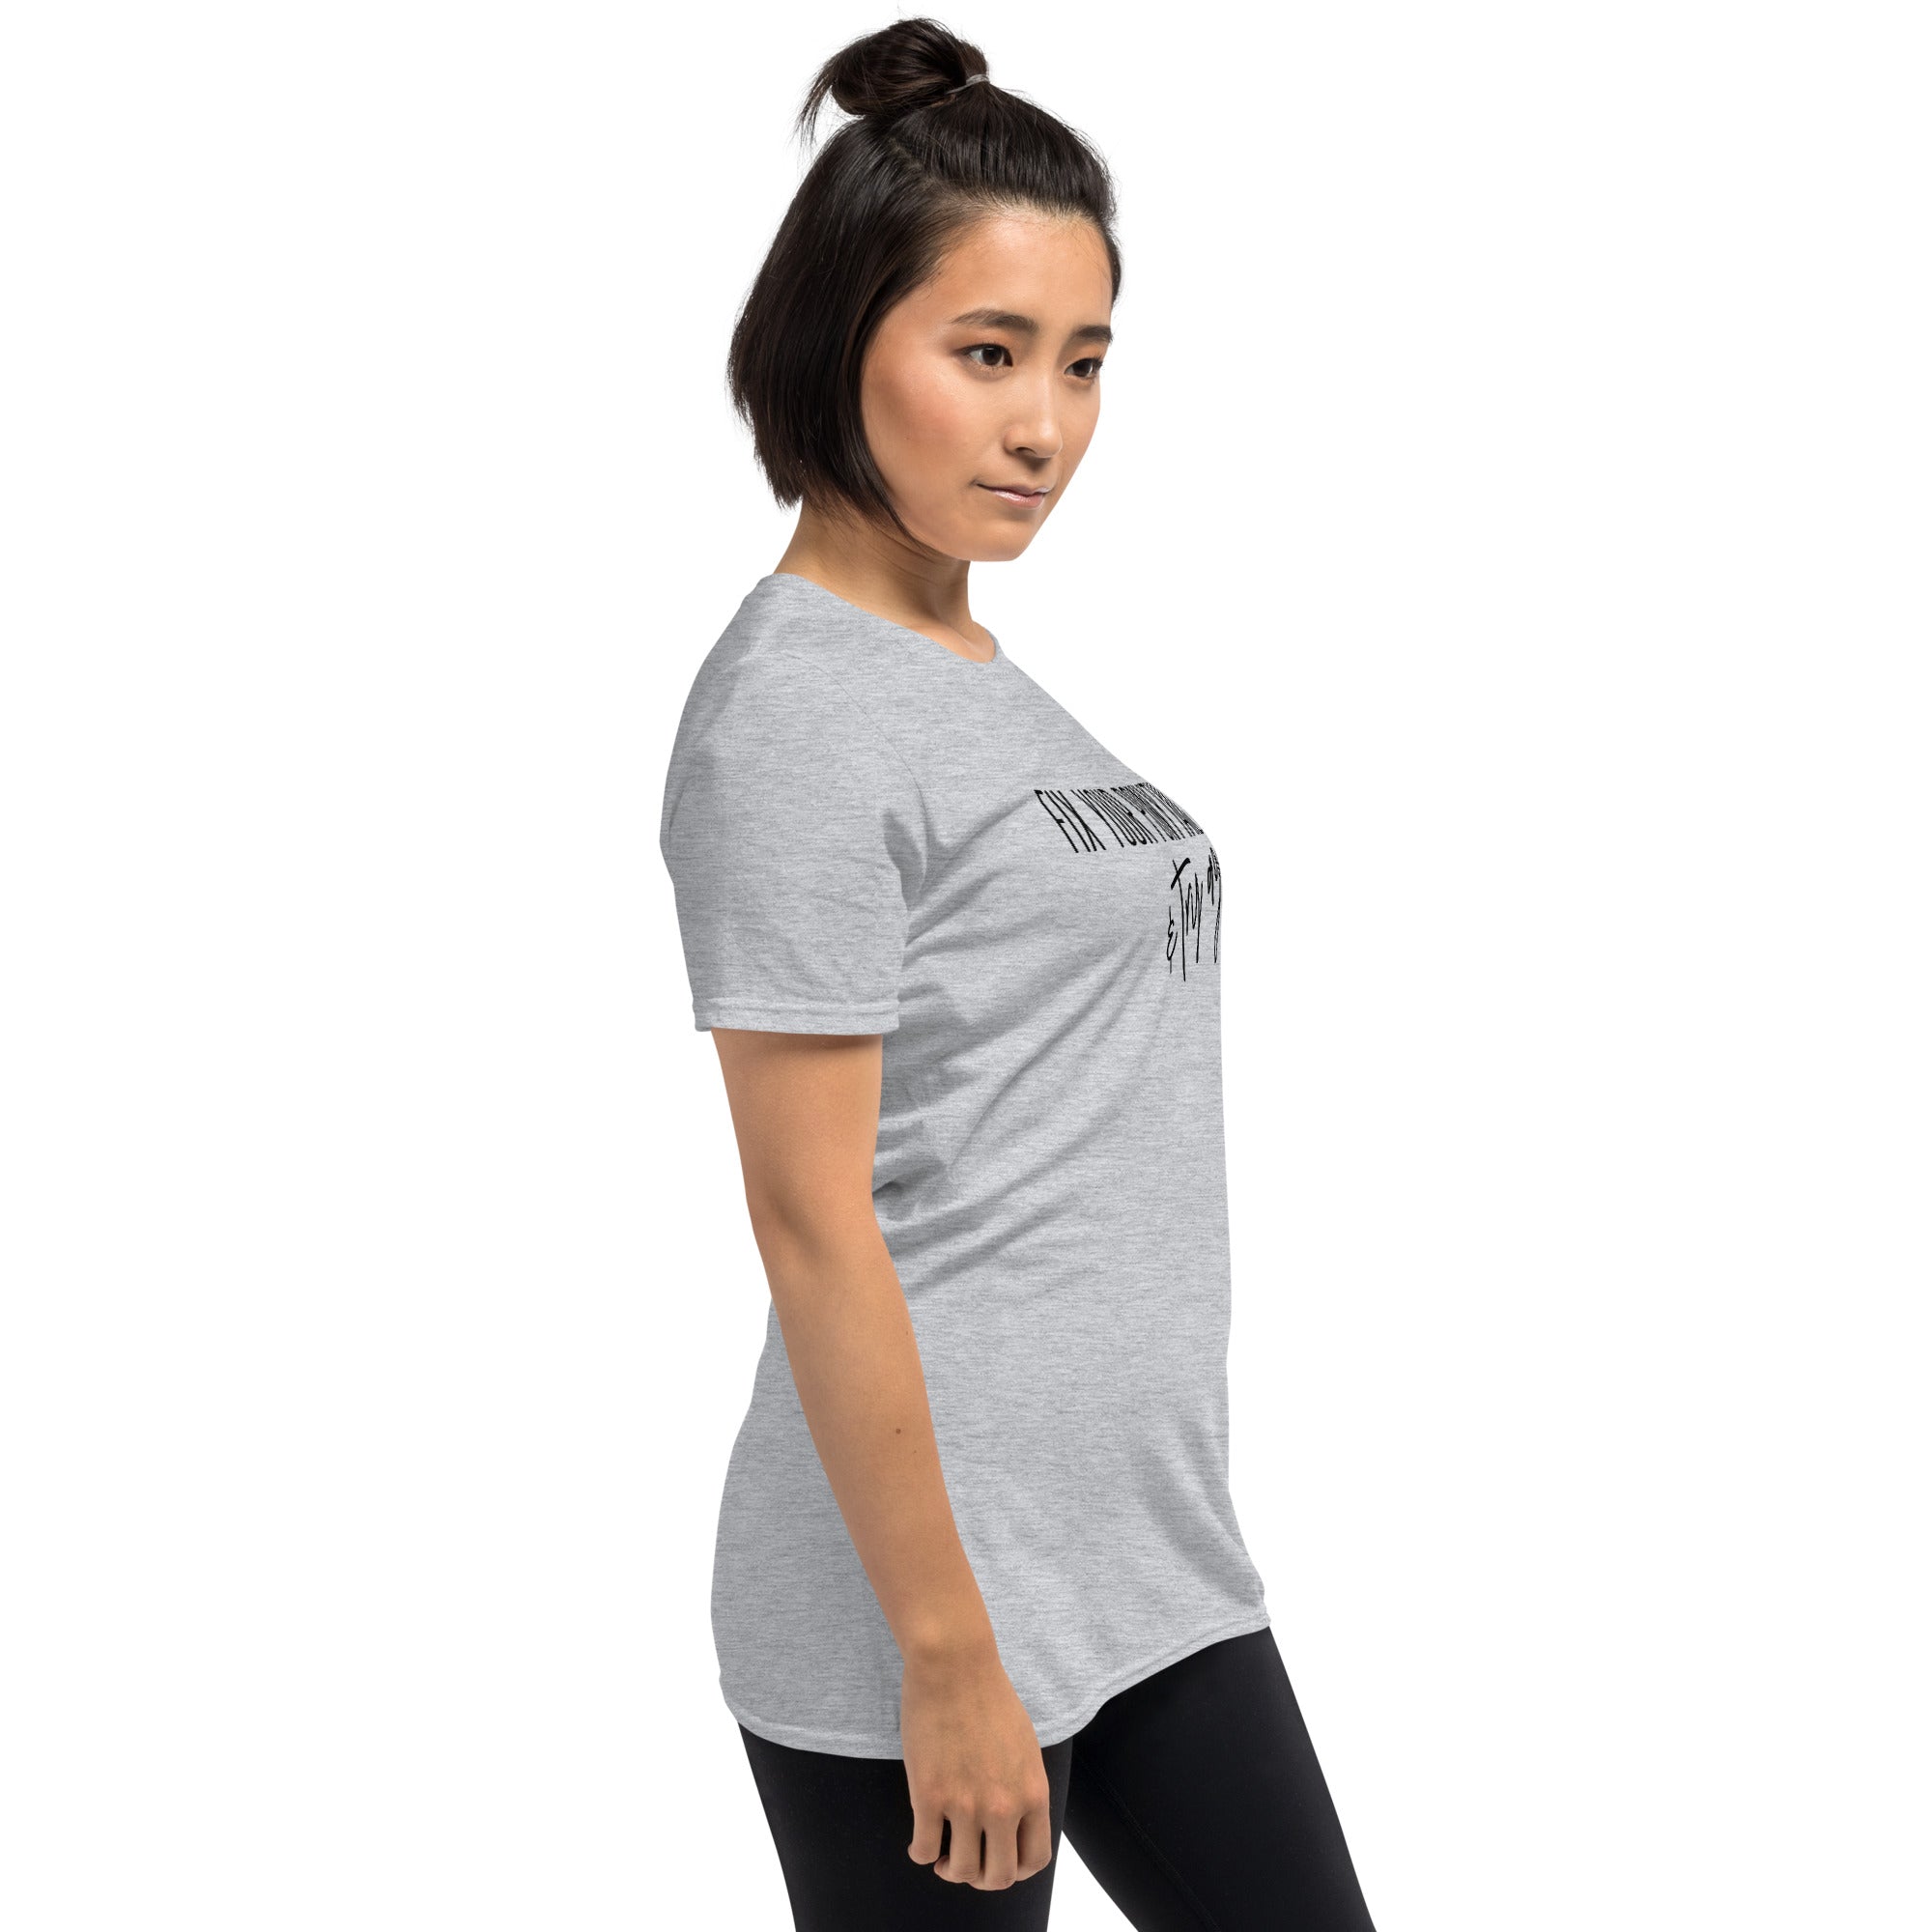 Fix Your Ponytail And Try Again - Short-Sleeve Unisex T-Shirt